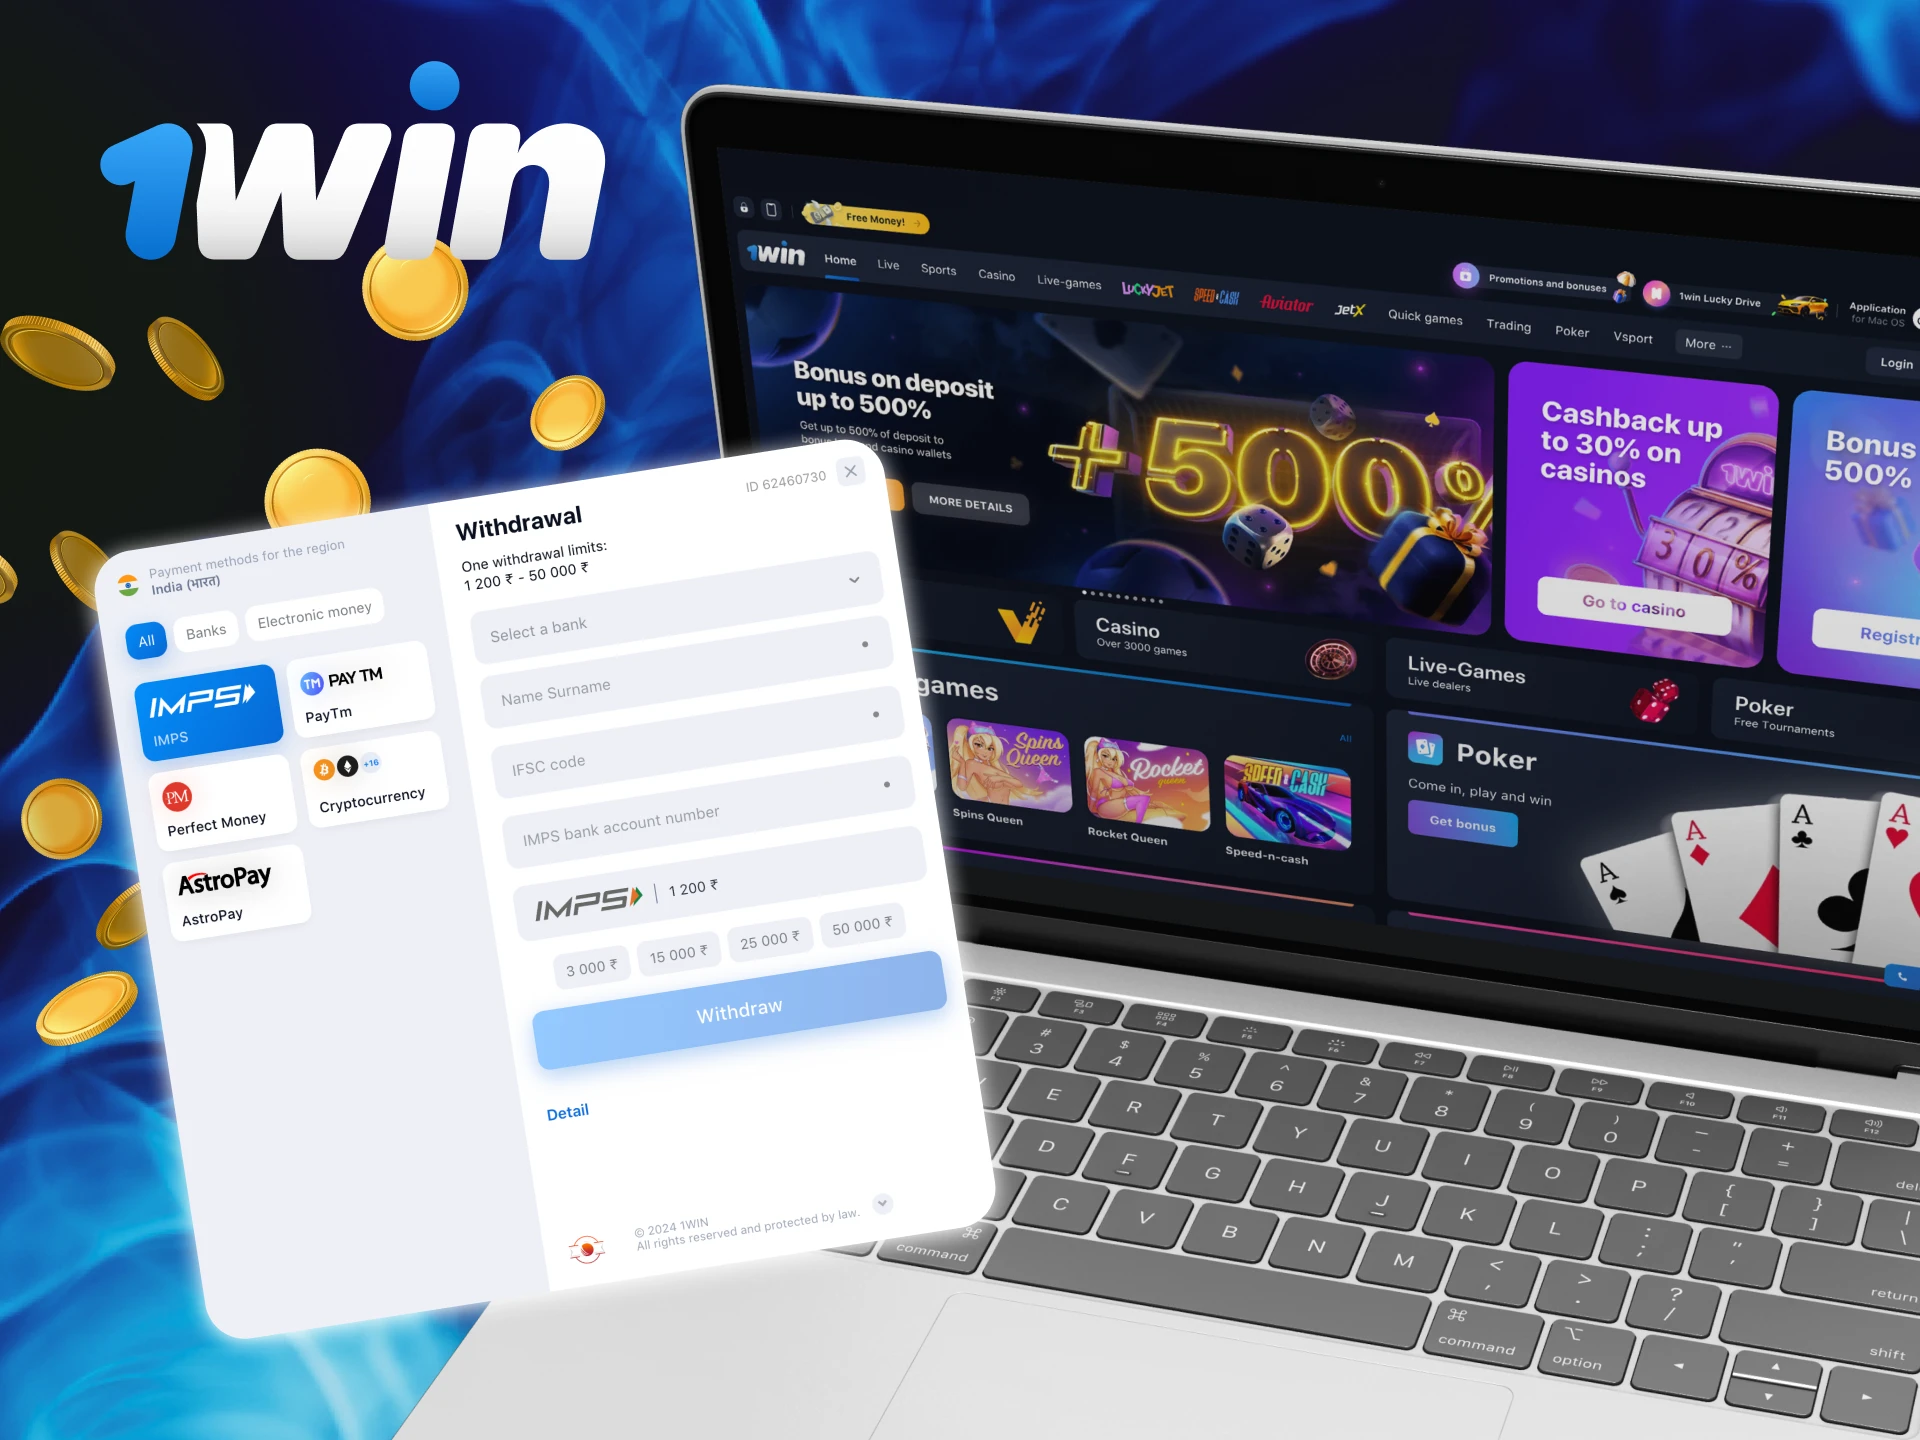 Step-by-step instructions for withdrawing money from your 1win casino account.